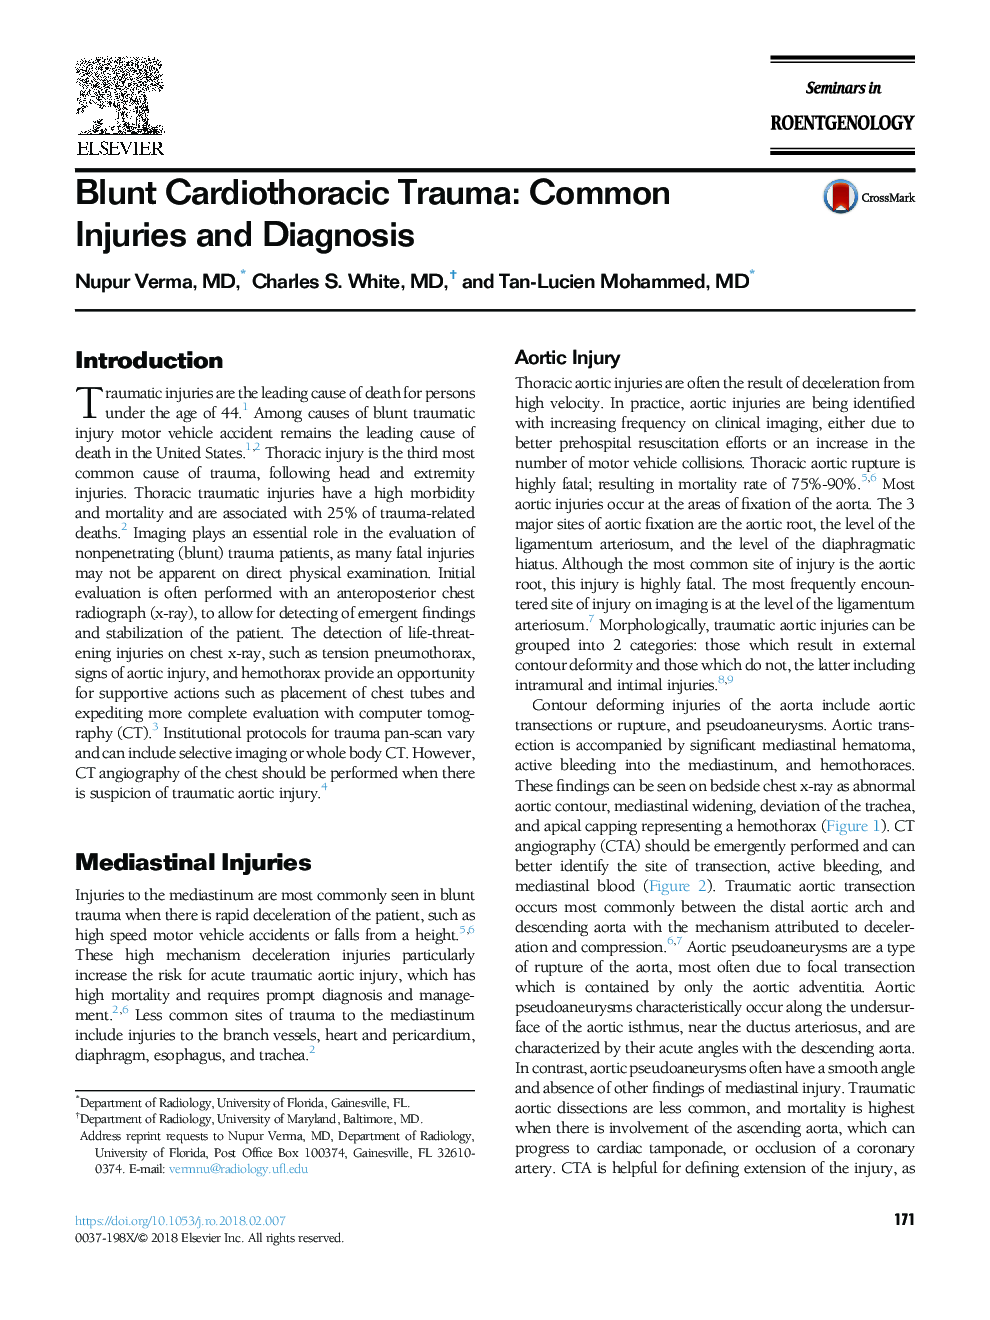 Blunt Cardiothoracic Trauma: Common Injuries and Diagnosis